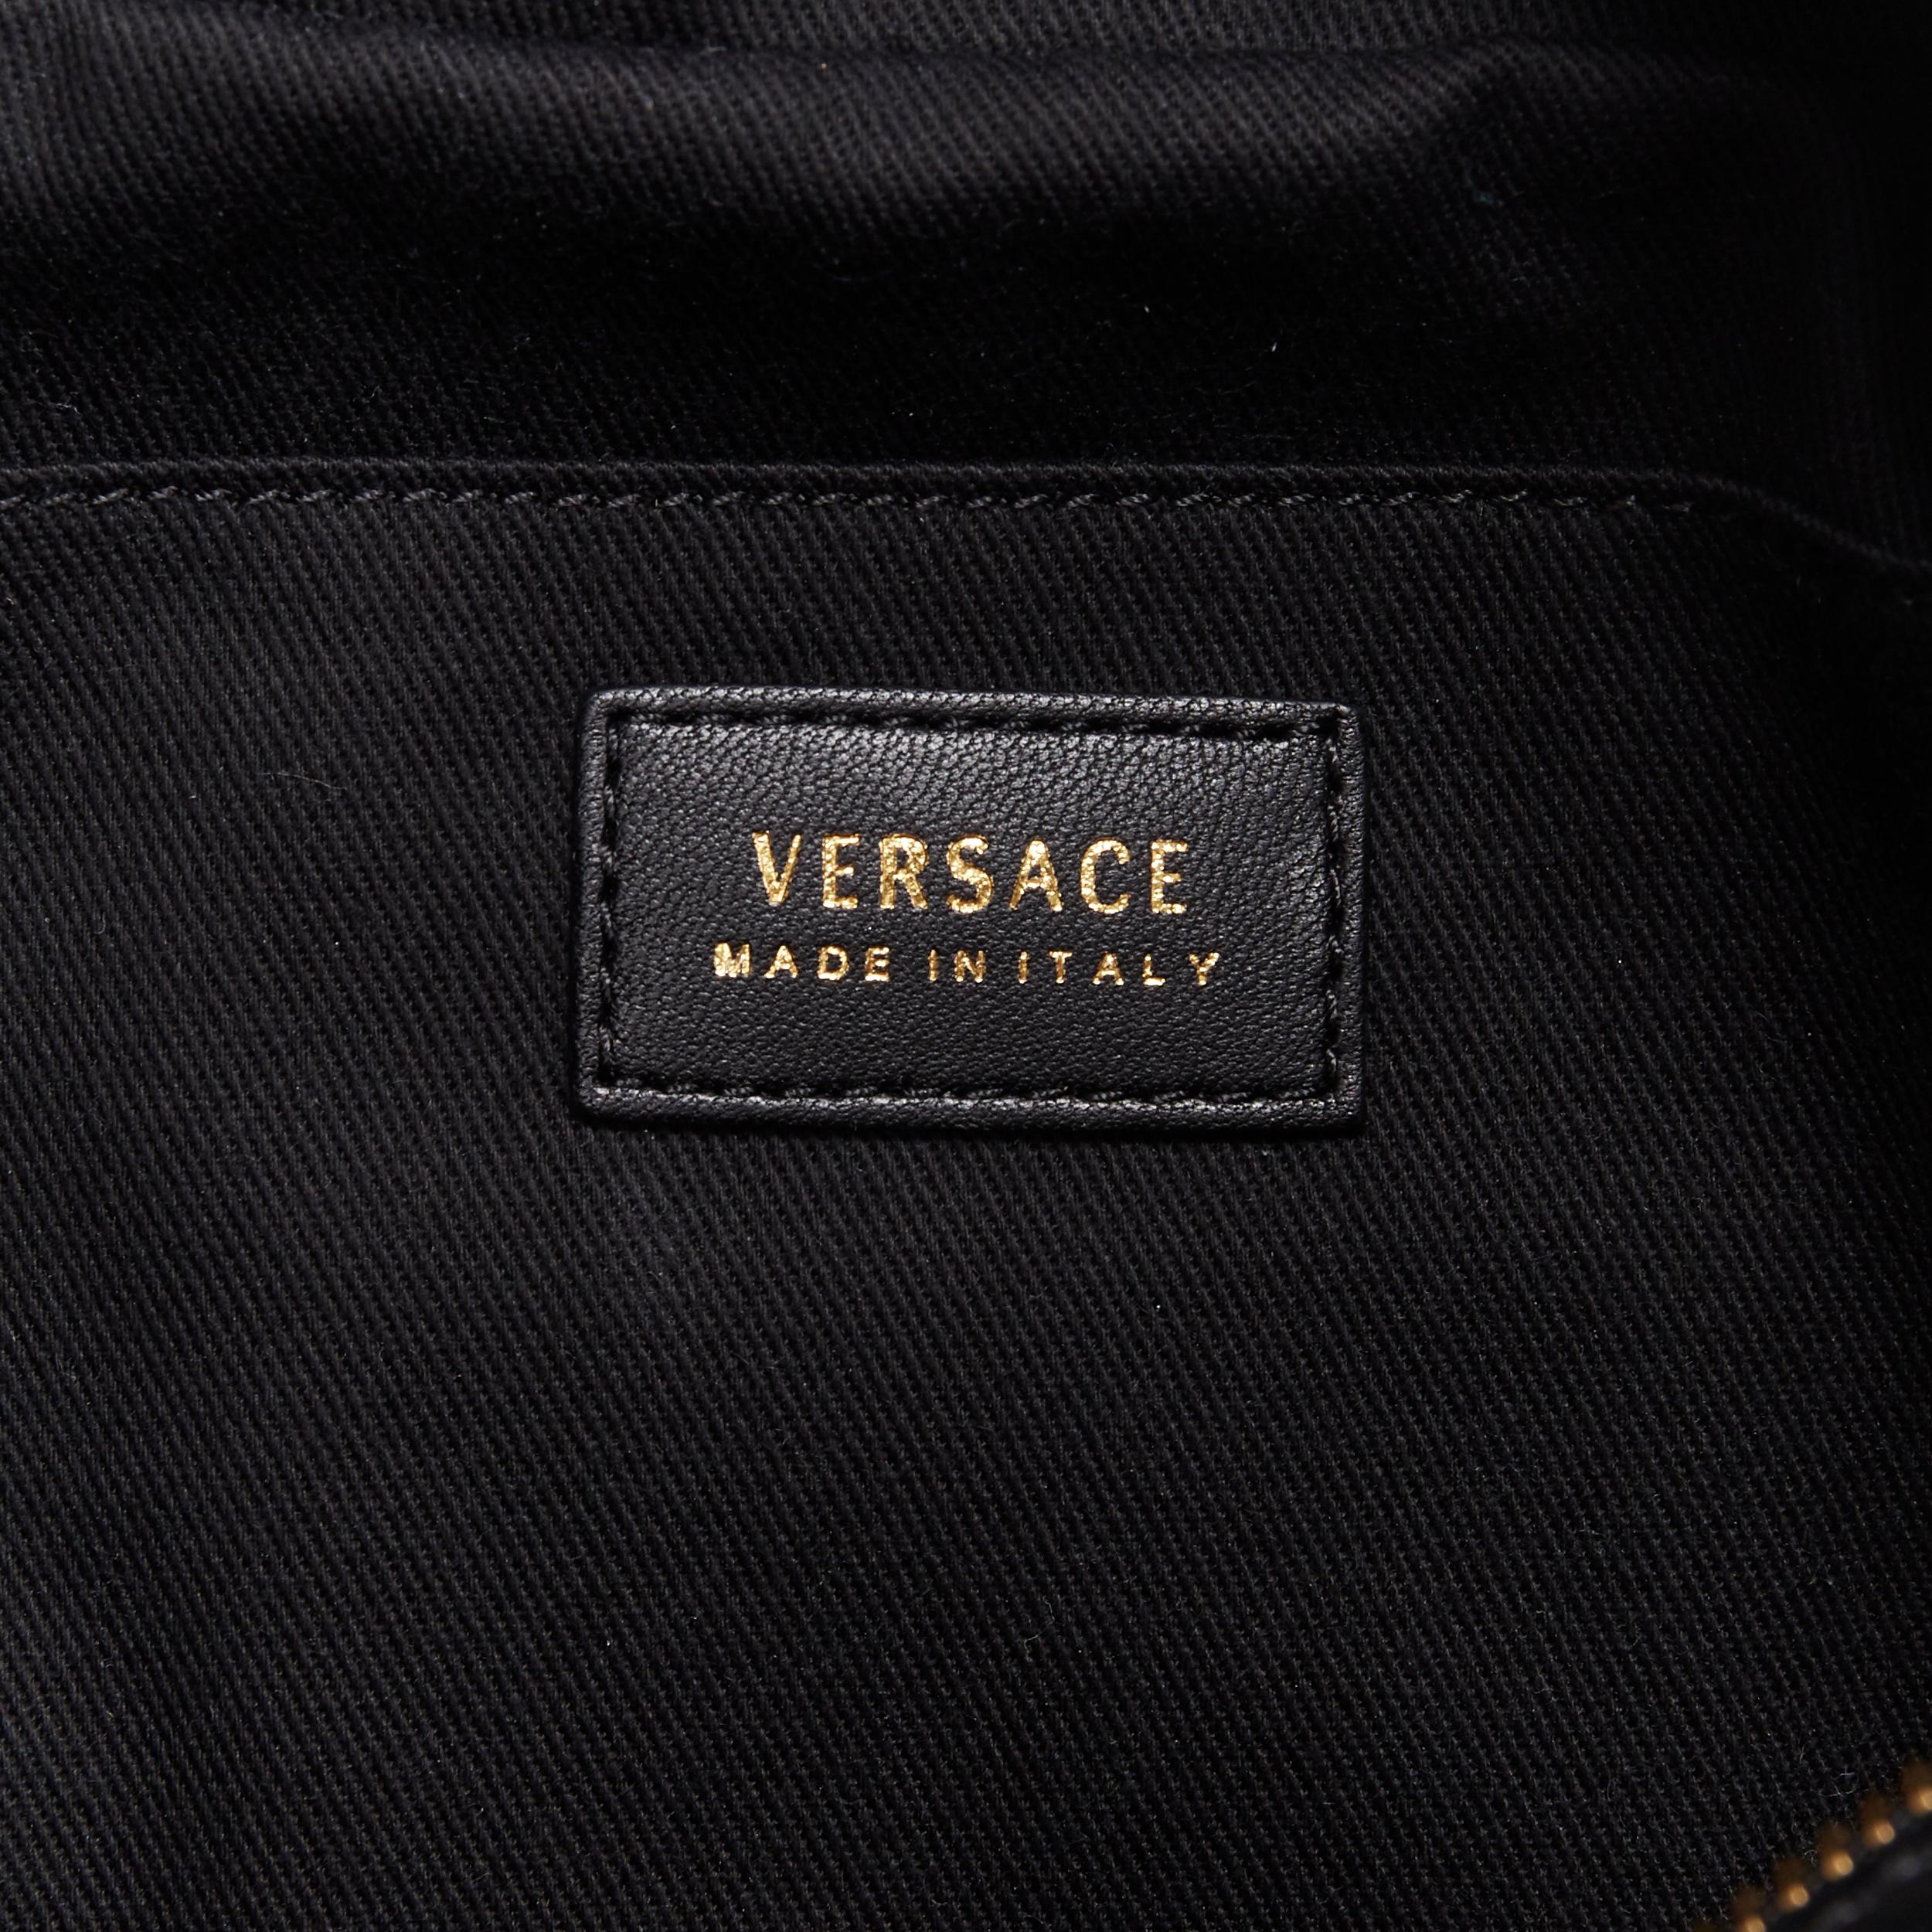 new VERSACE black diamond quilted lamb leather medusa large bowling bag satchel 2